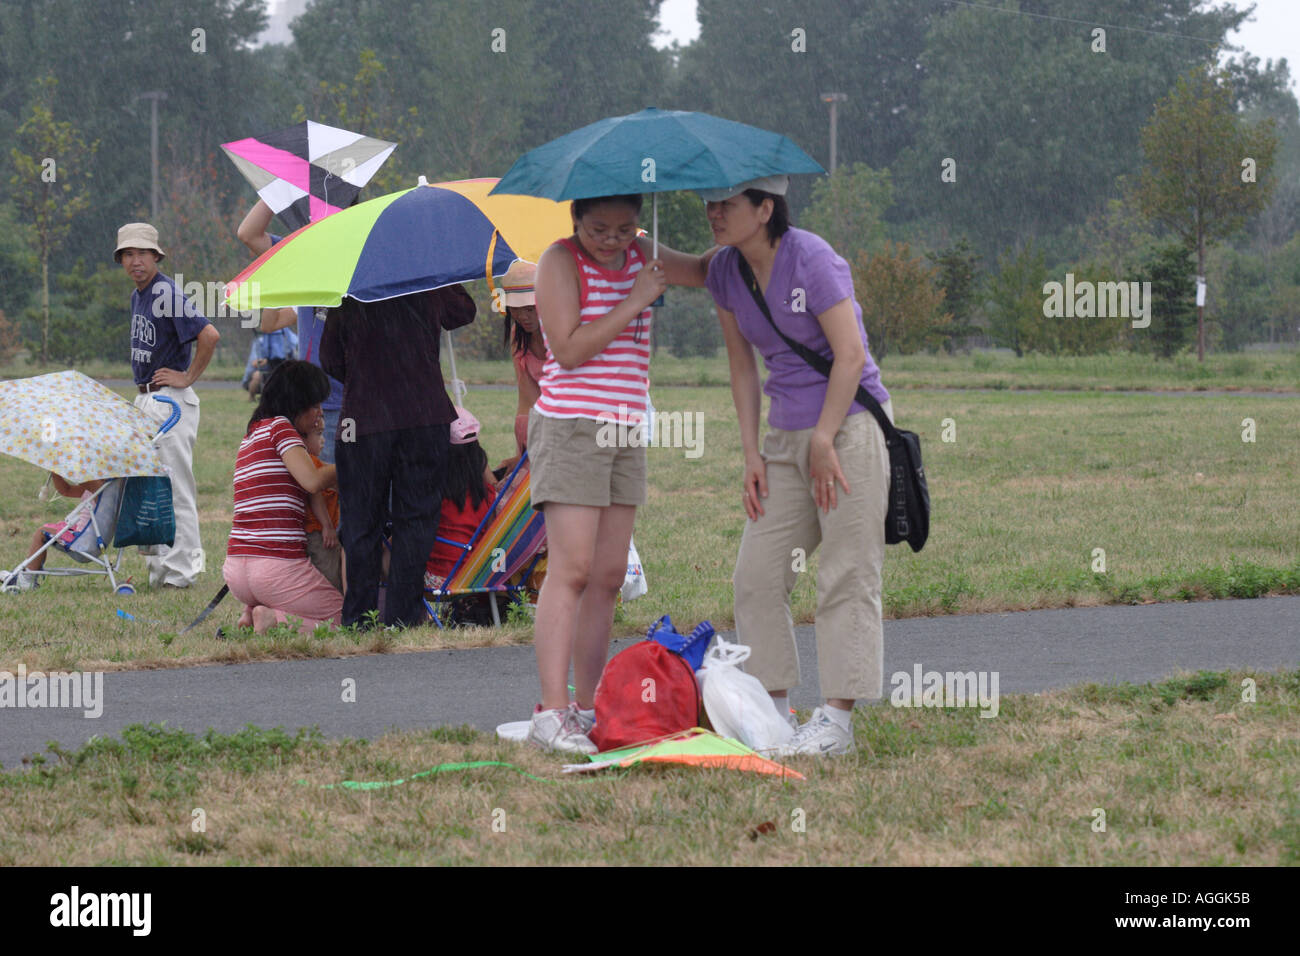 Mother and Daughter share an umbrella at Kite Festival in Liberty State Park across from Manhattan Stock Photo